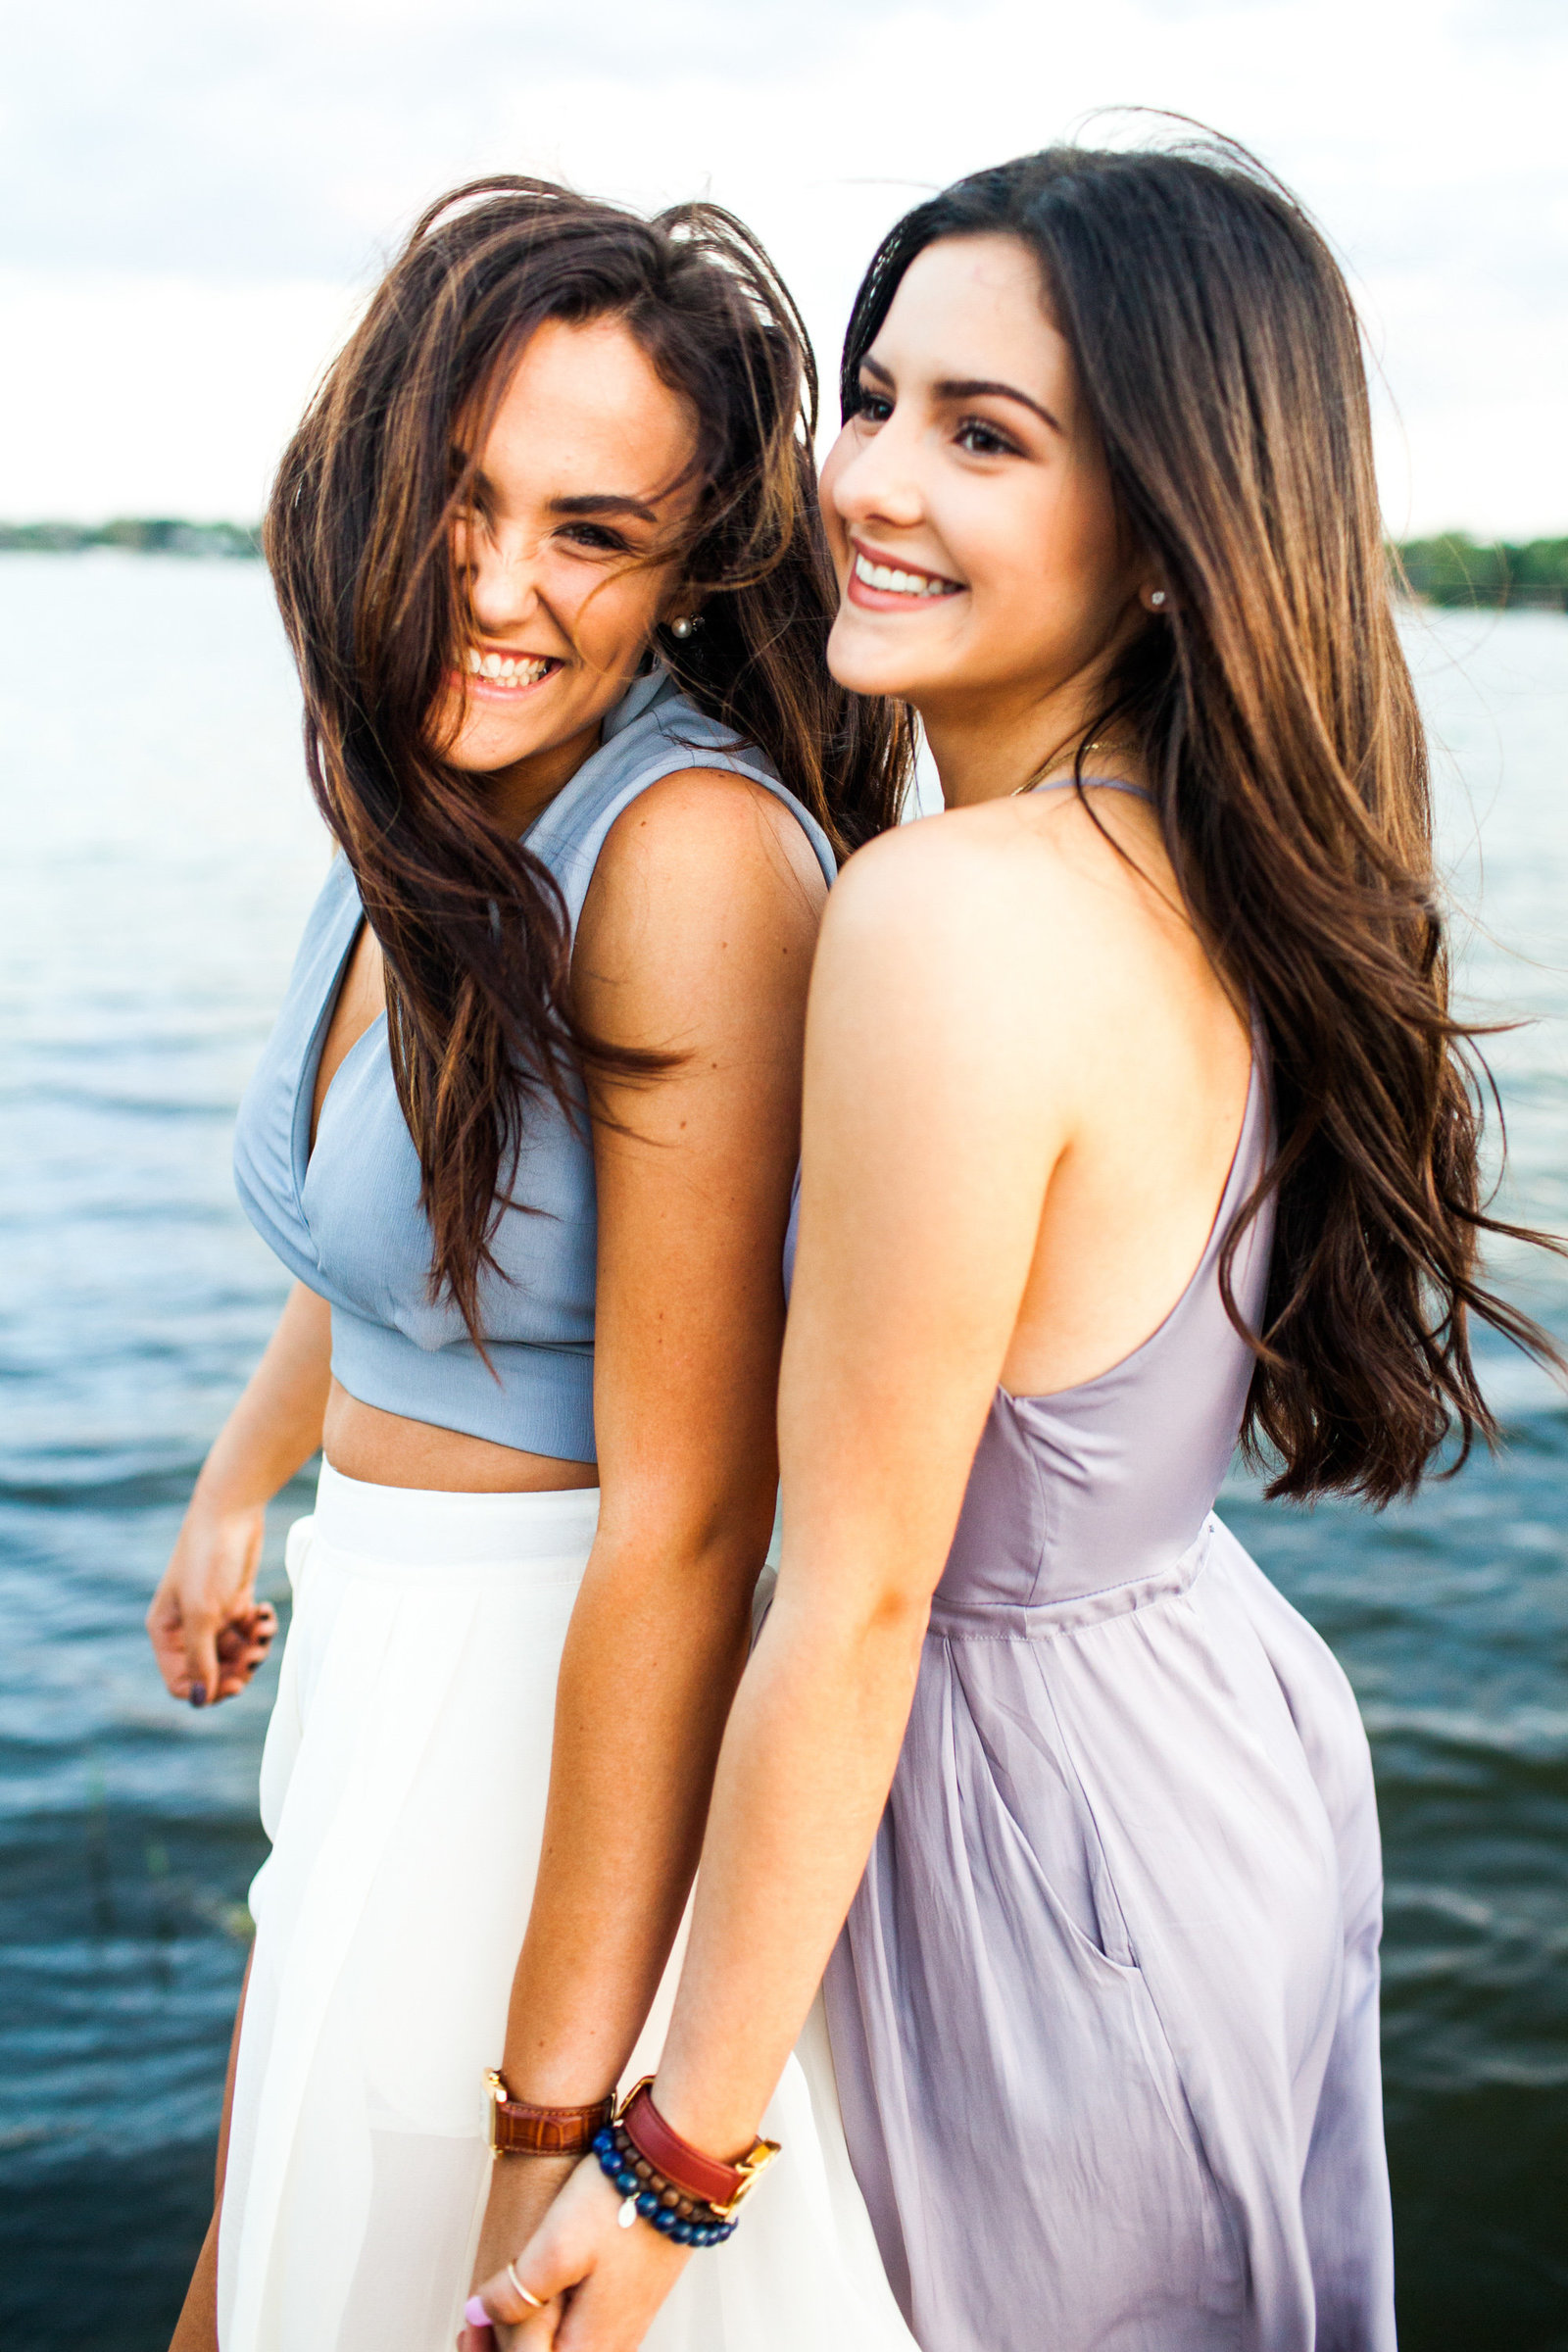 Senior portraits with your best friend by the water